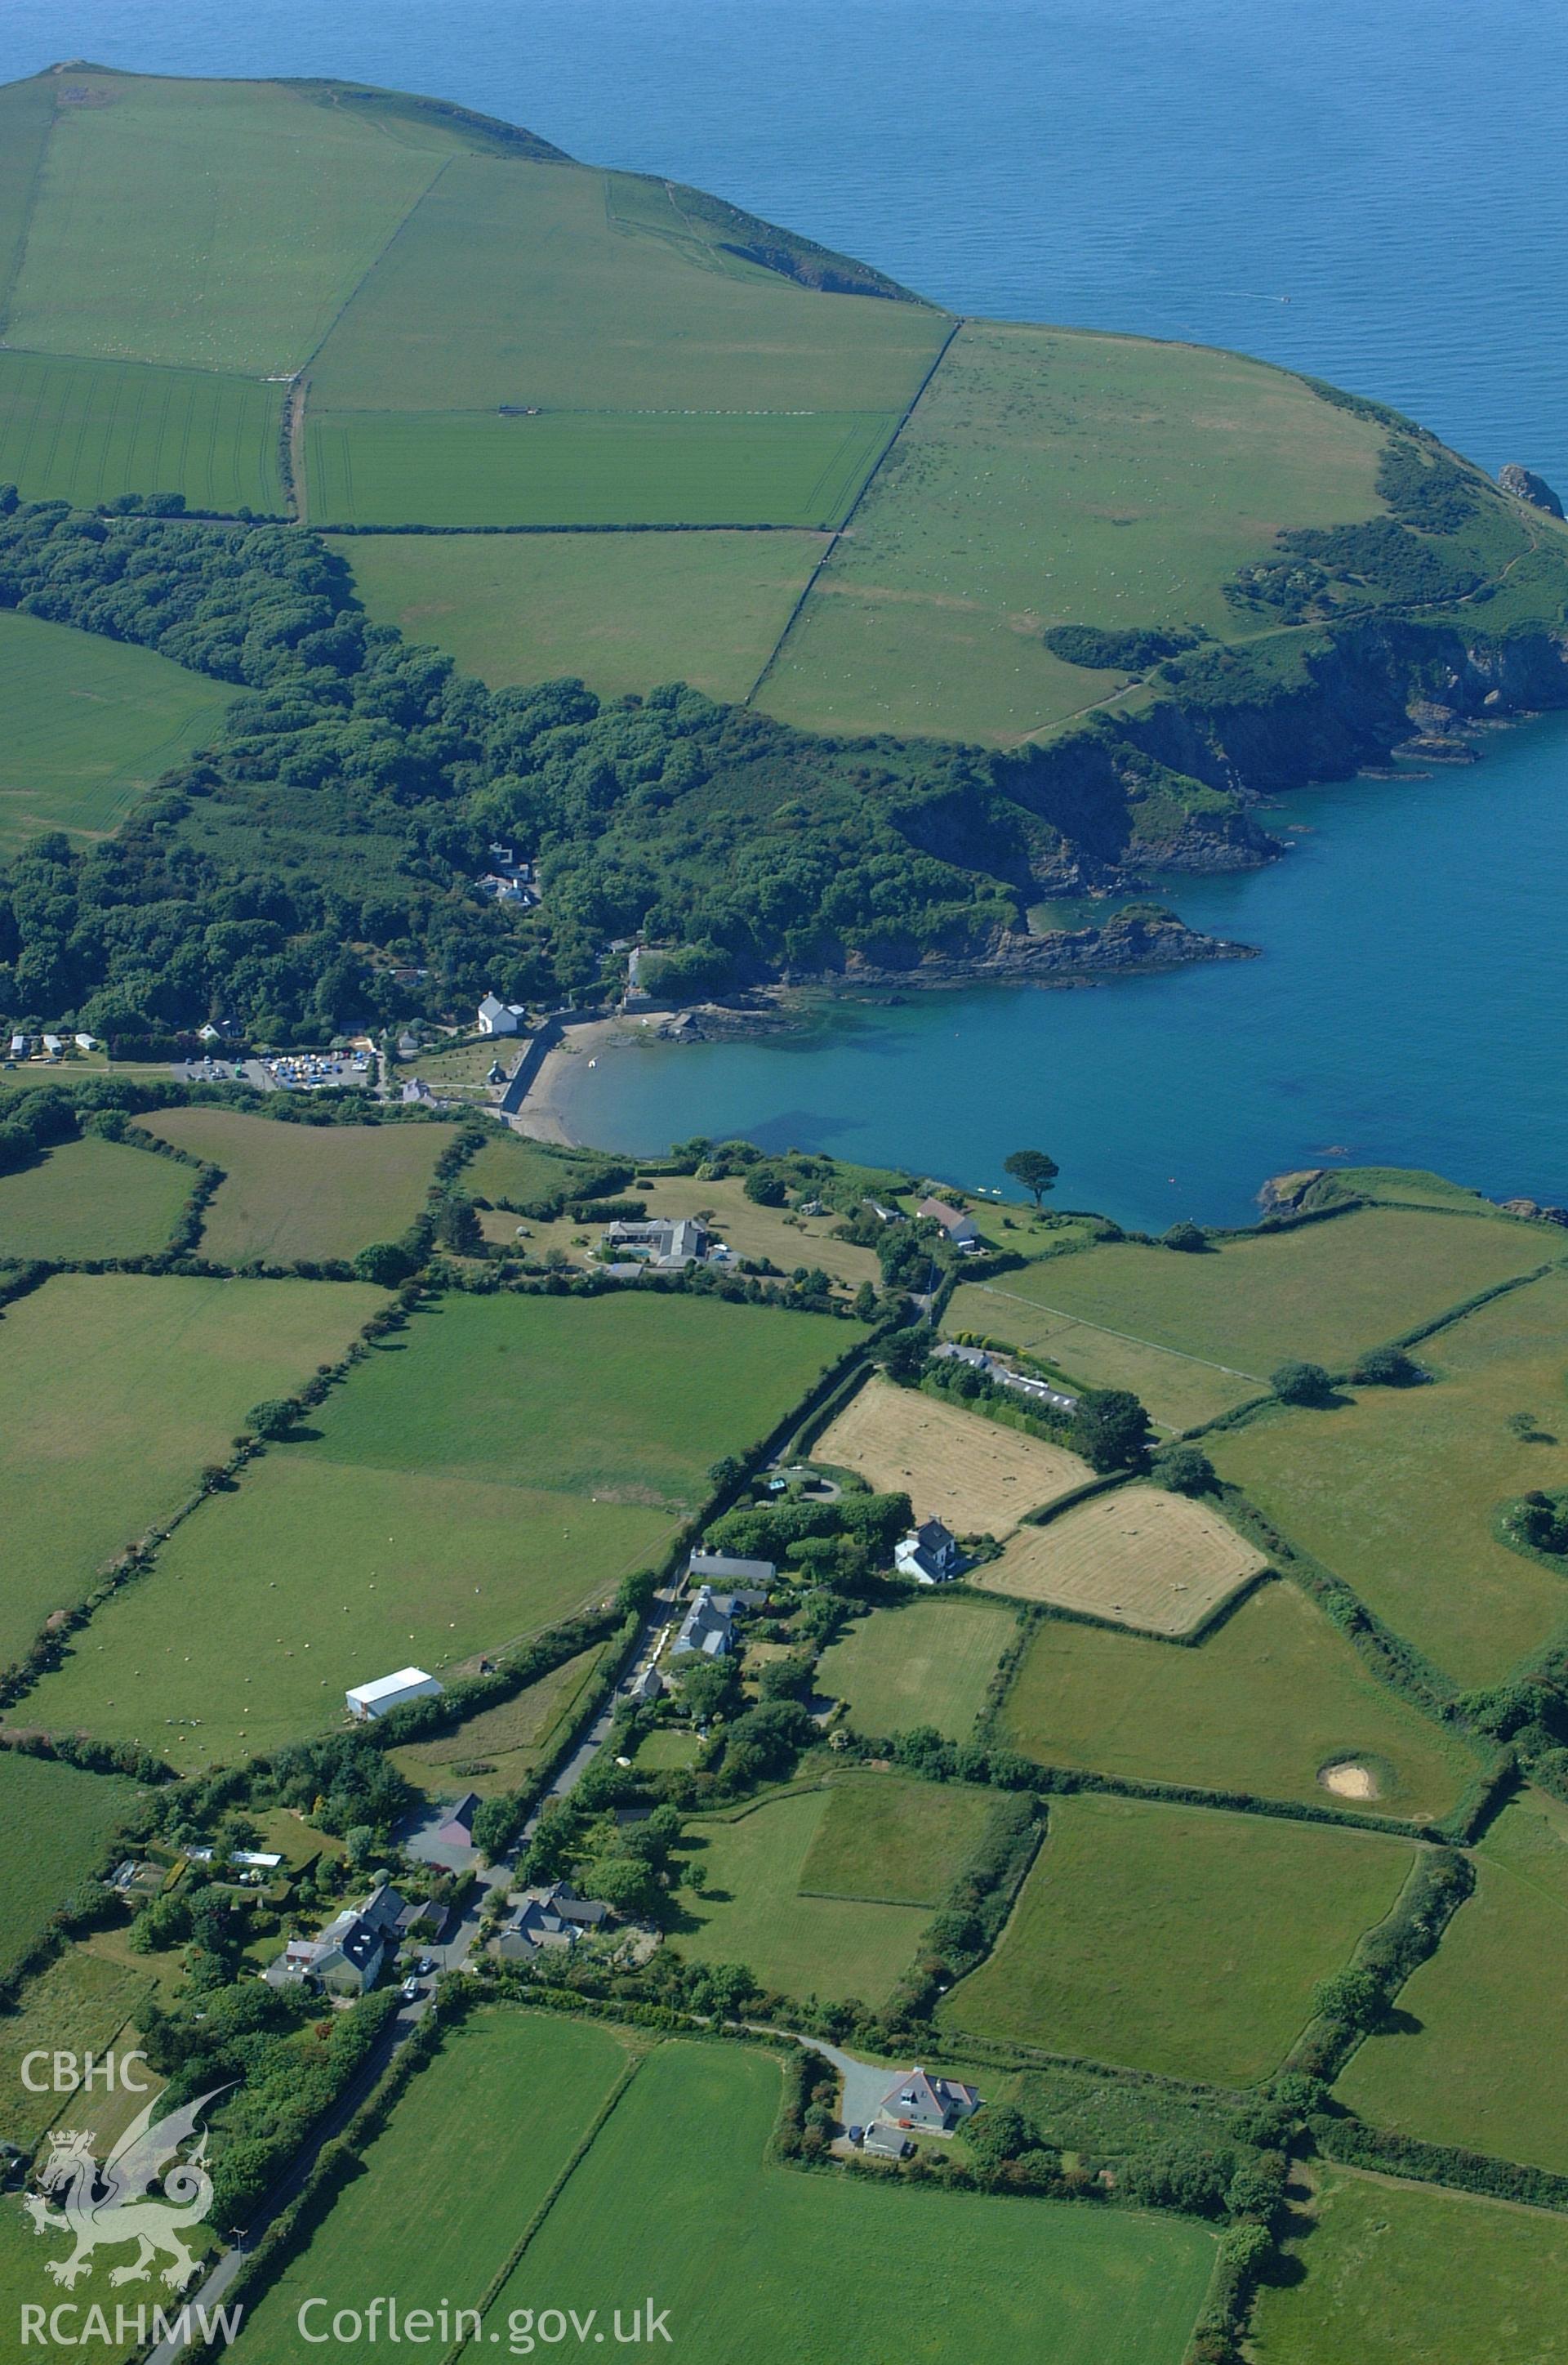 RCAHMW colour oblique aerial photograph of Dinas harbour and Cwm-yr-eglwys taken on 15/06/2004 by Toby Driver